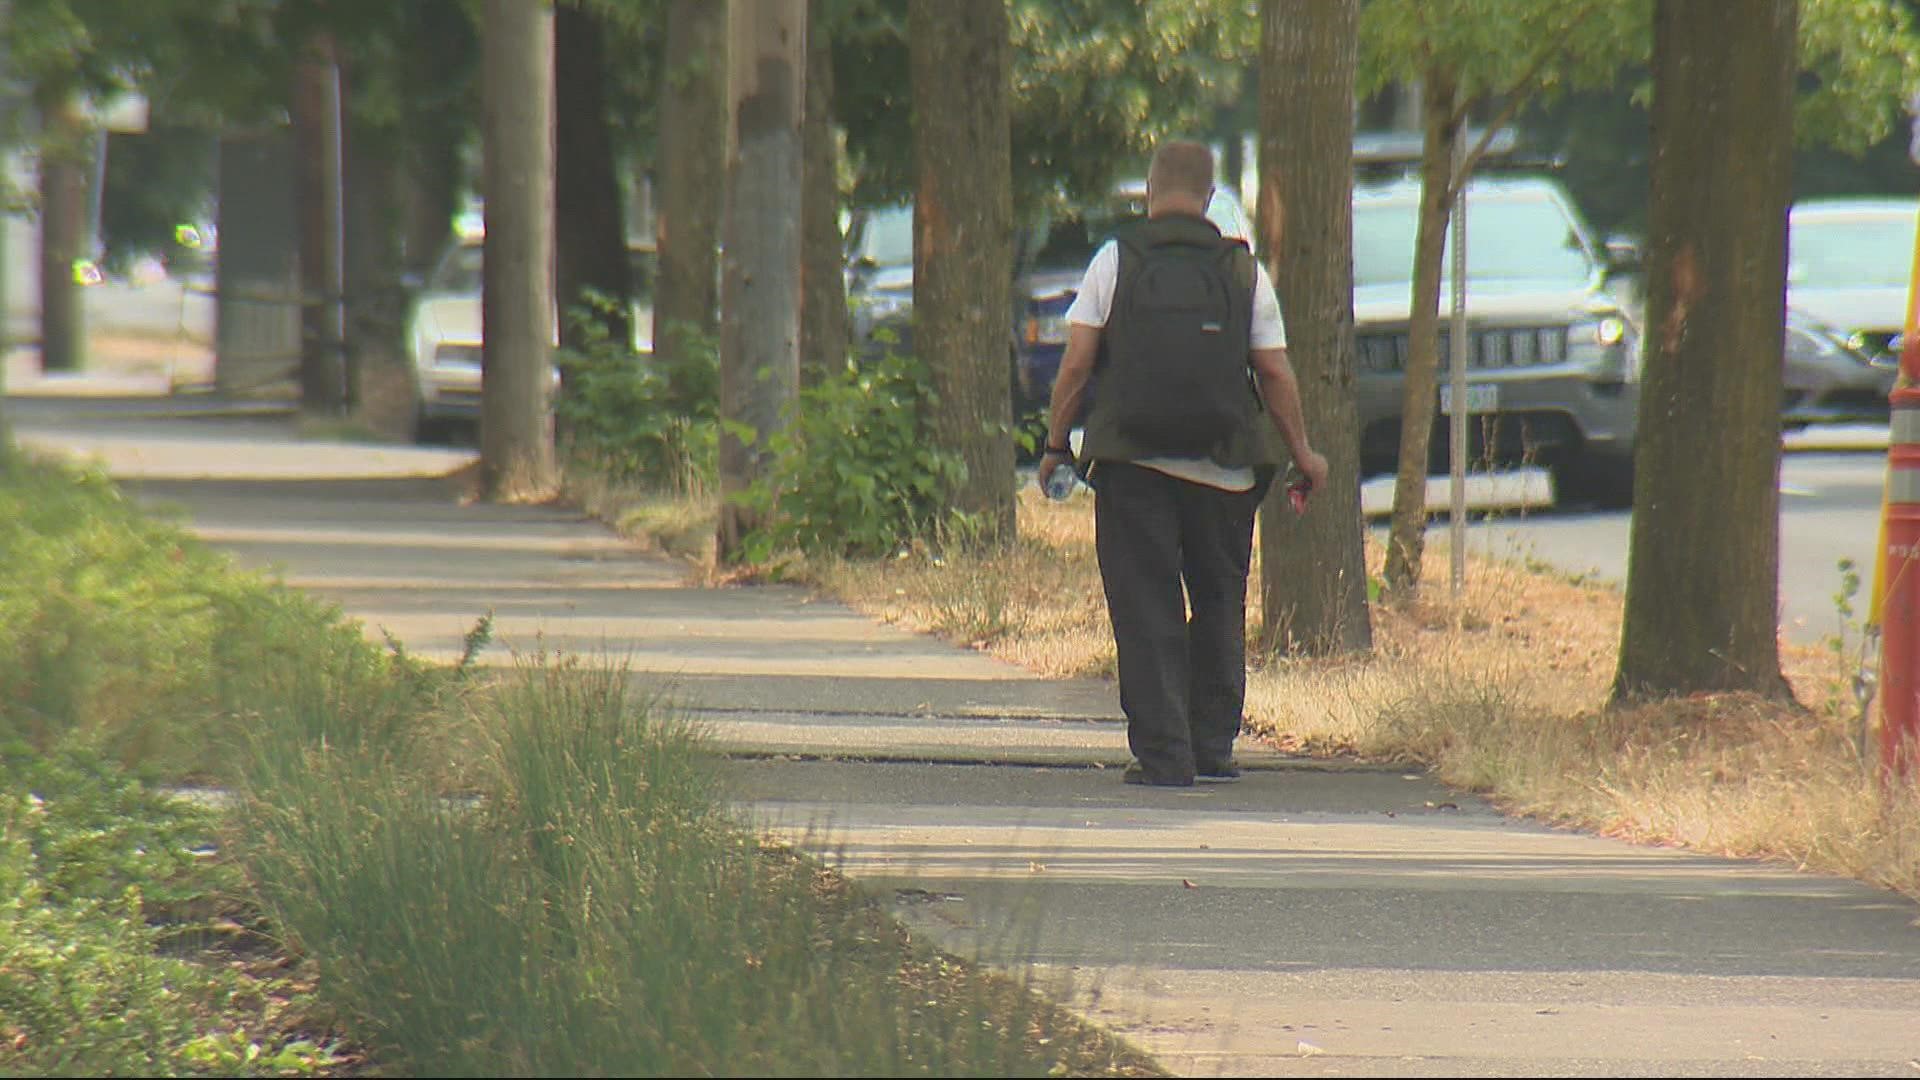 At least 19 people in the Portland area went to the ER for heat-related illnesses this week. It's an improvement compared to June's heat wave that killed dozens.